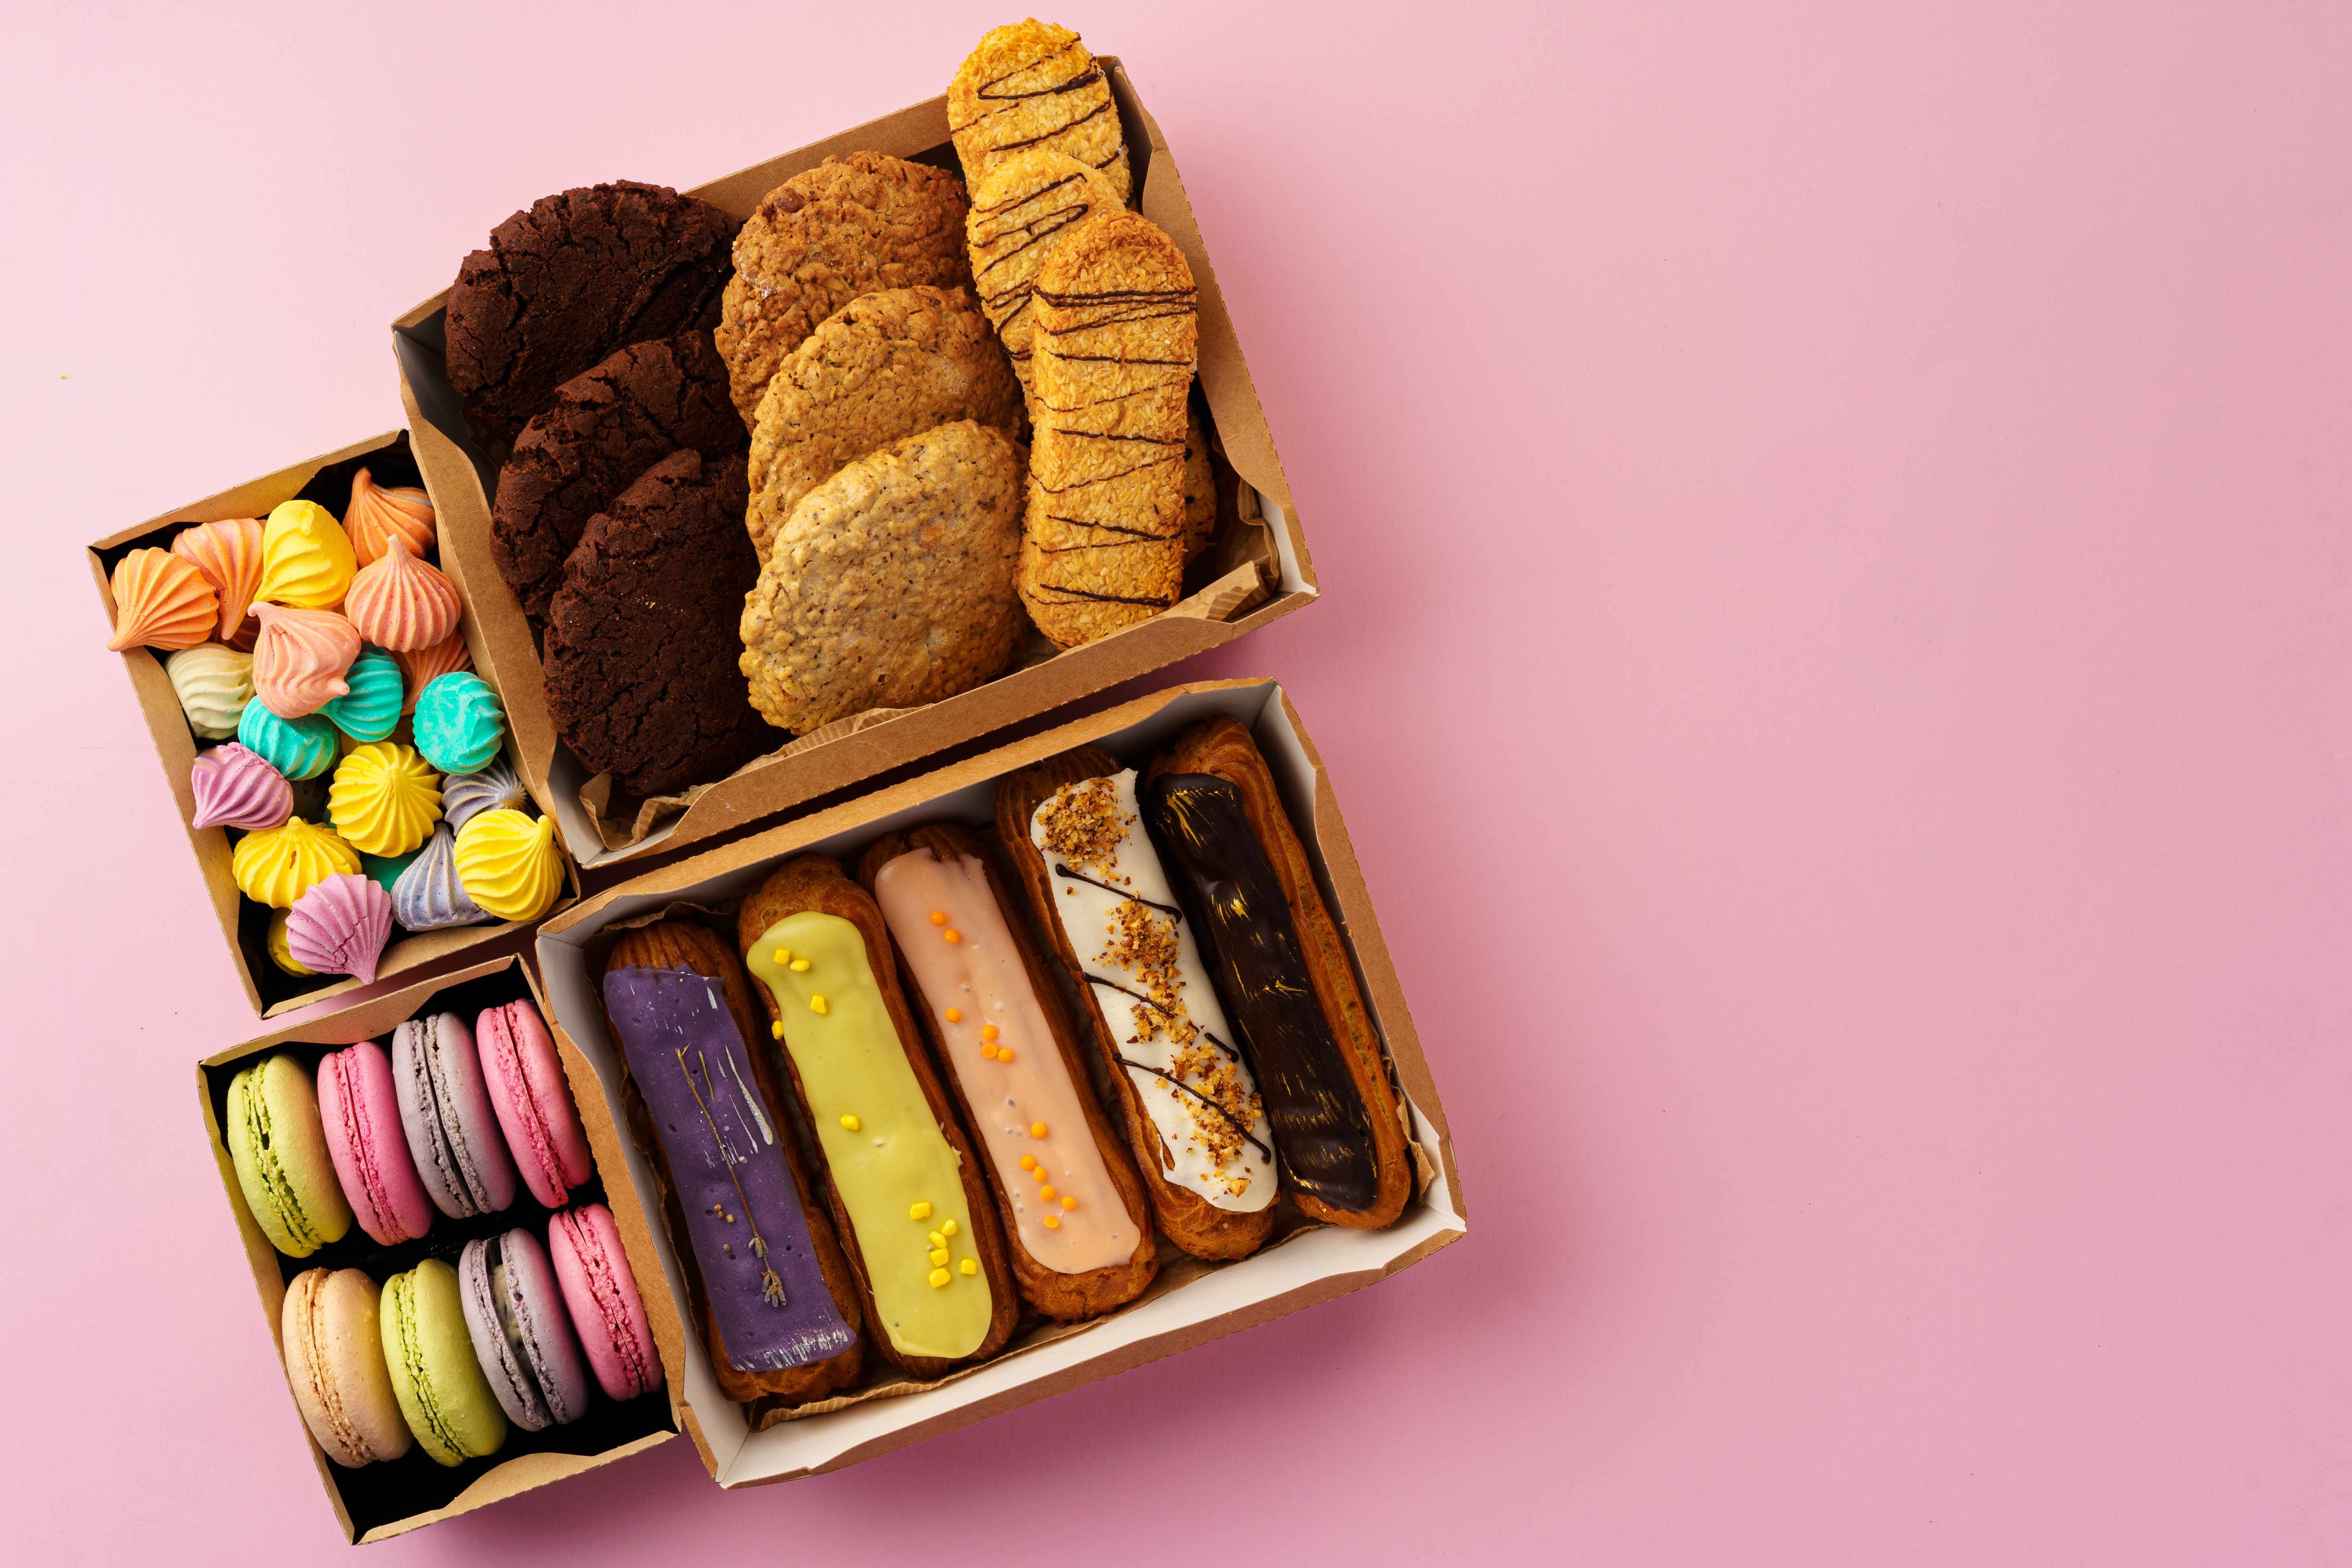 A cookie subscription makes a thoughtful last minute gift idea.